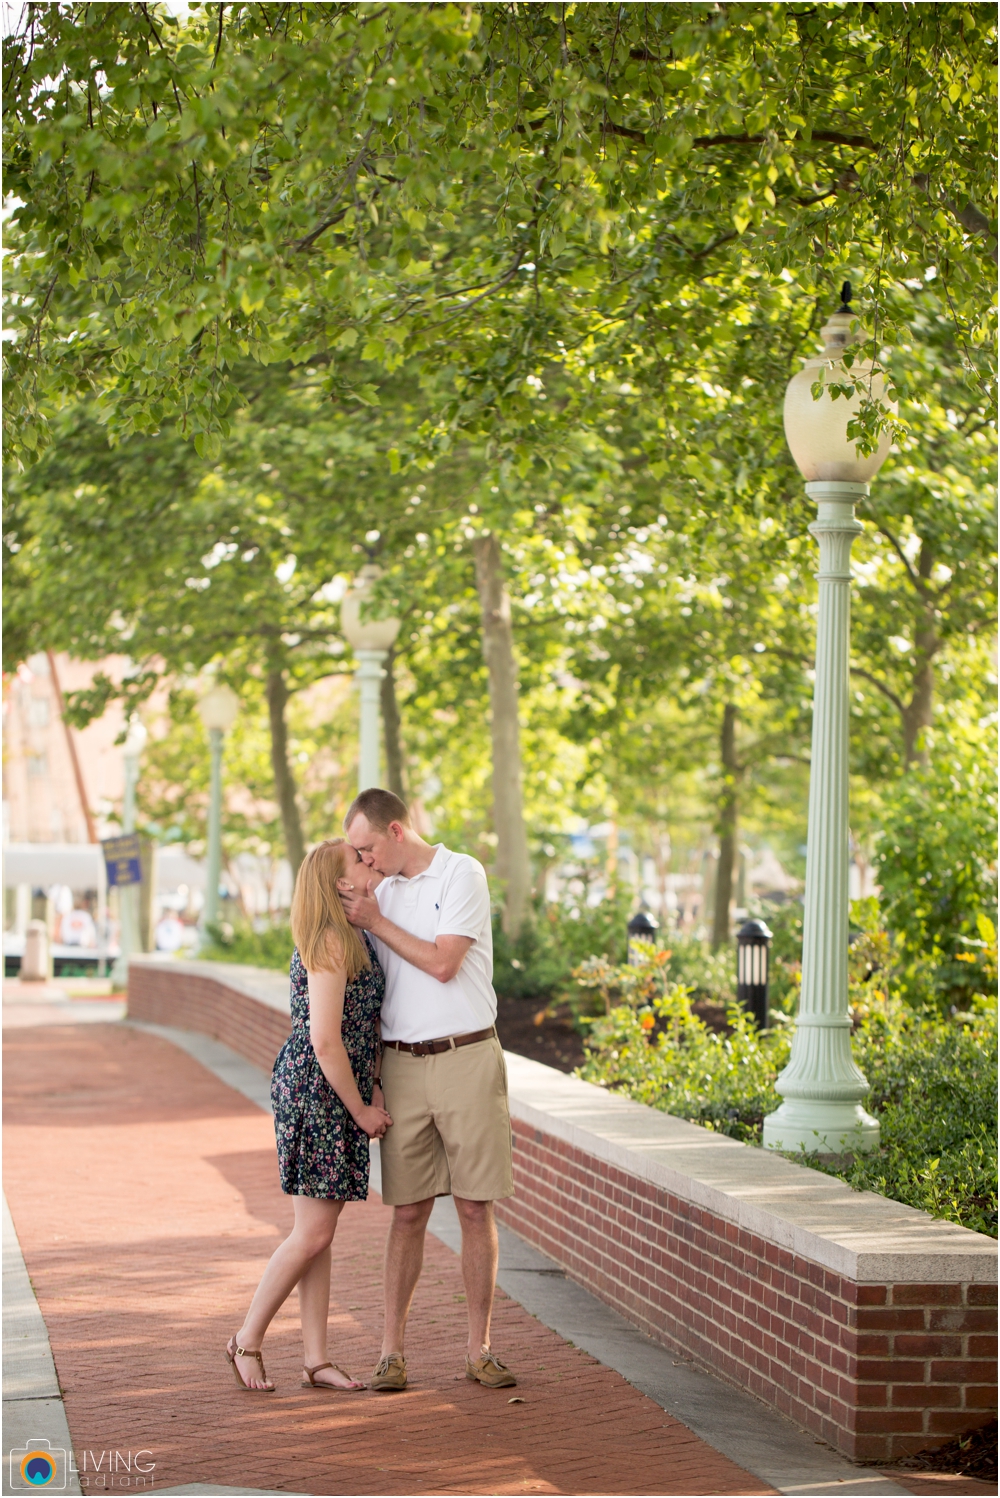 casey-clark-engaged-annapolis-downtown-naval-academy-engagement-session-living-radiant-photography-maggie-patrick-nolan-outdoor-water-boats_0016.jpg